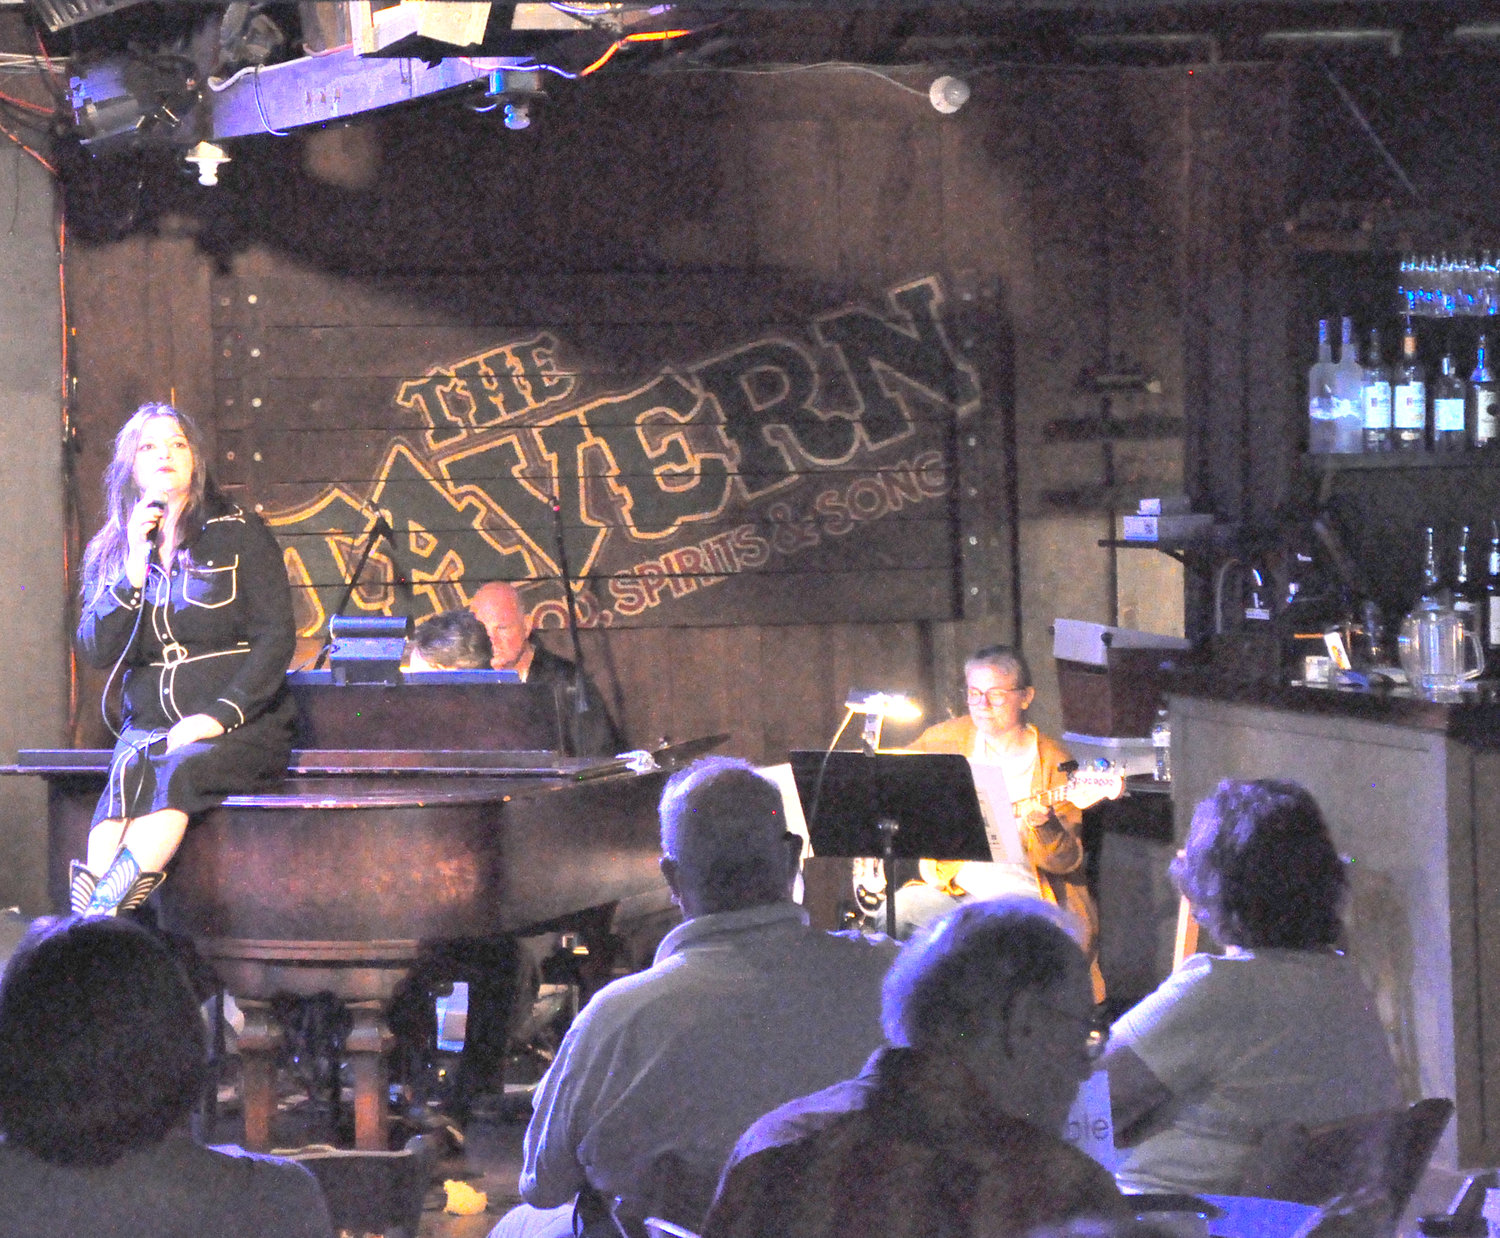 Not only is Erin Crosby's voice perfectly suited to Patsy's greatest hits, but she shared little-known tidbits about the singer’s career while performing "Crazy about Patsy Cline" to a rapt audience at the Forestburgh Tavern last week.